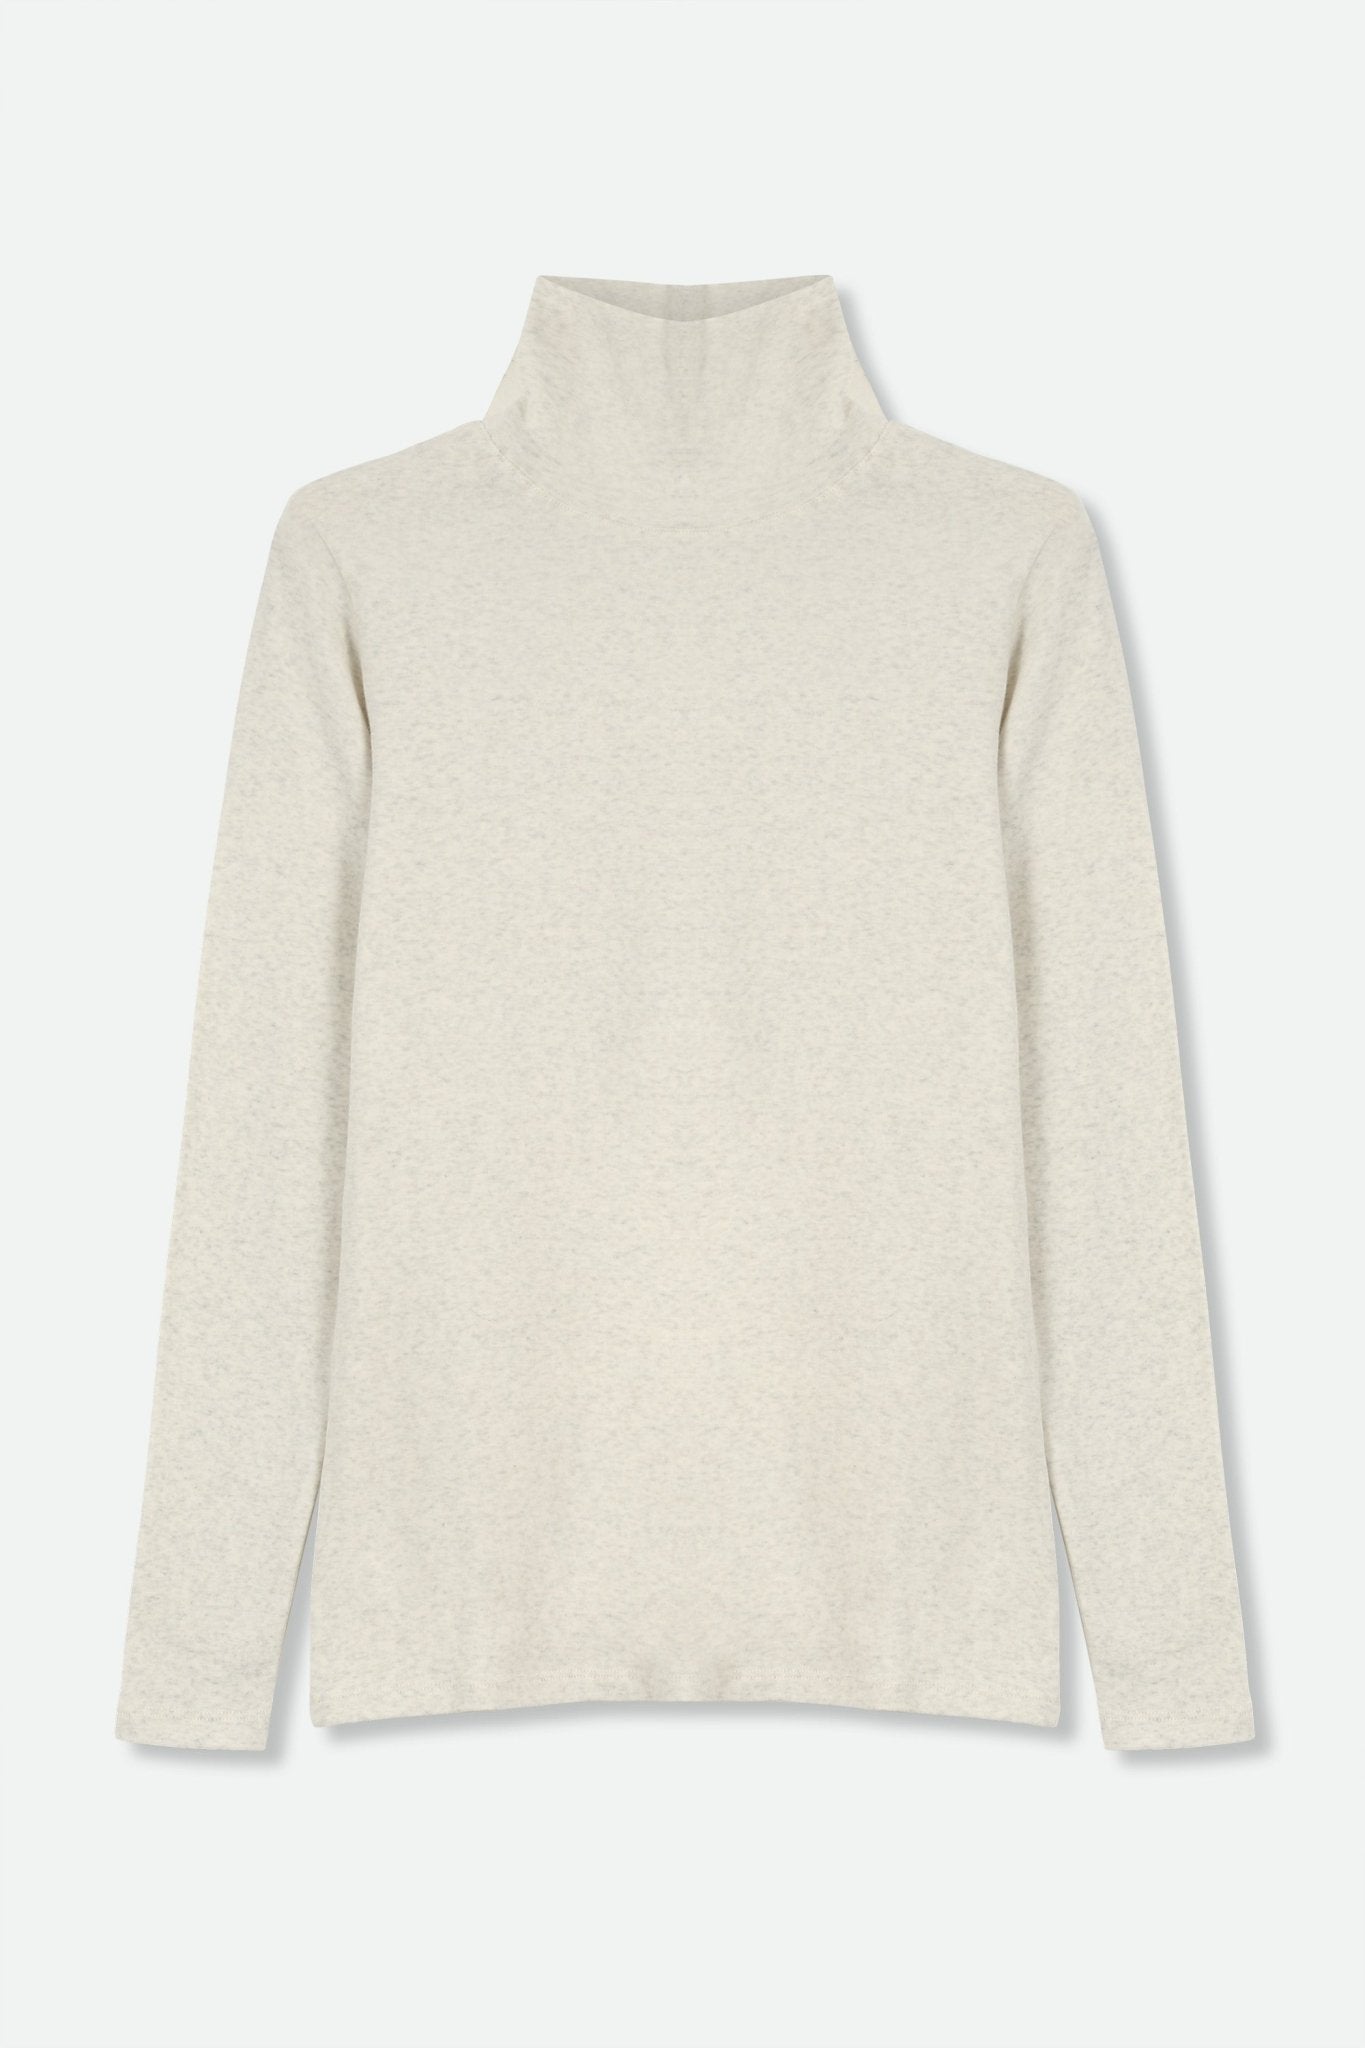 LONG SLEEVE HIGH NECK IN HEATHERED PIMA COTTON - Jarbo